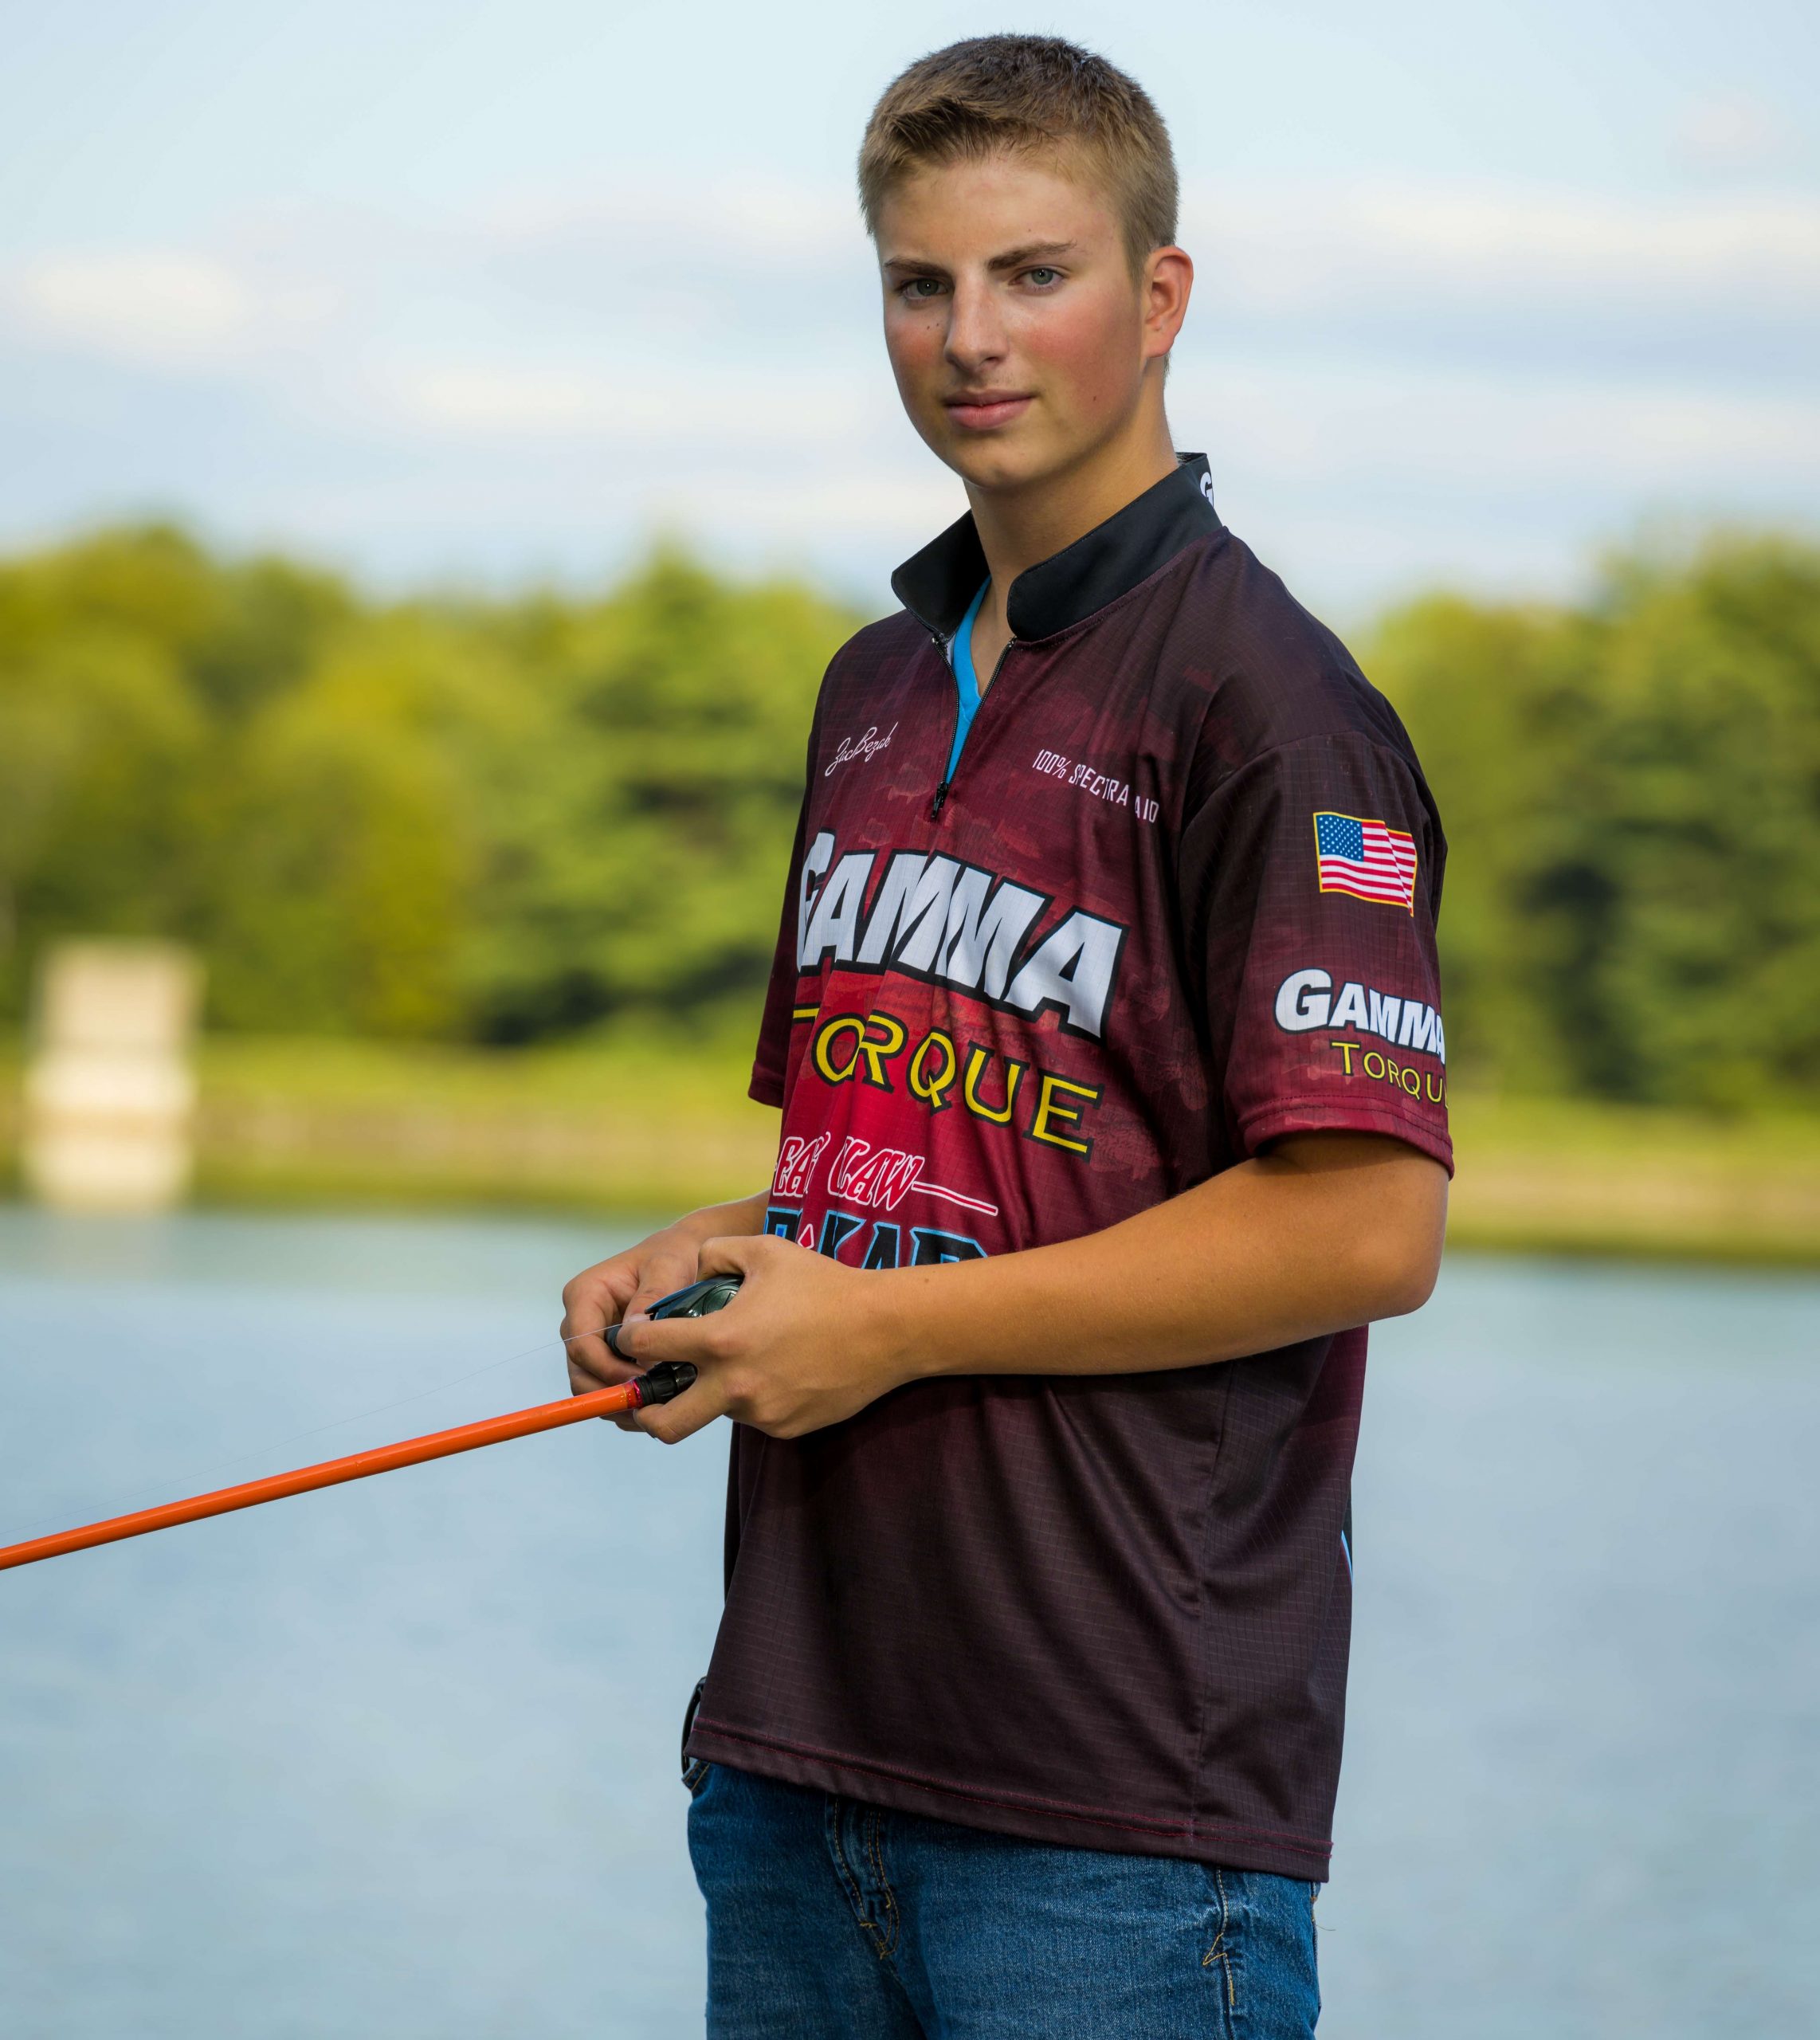 <b>Pennsylvania: Zachary Bezak</b><br>
Bezak is a member of both the Punxsutaweny Christian School B.A.S.S. Master High School Team and the Bassmasters of Crawford County Adult Club. He has two wins, including a first-place finish in the B.A.S.S. High School PA State Championship. Bezak was a 2015 Lunker B.A.S.S. High School State qualifier.
